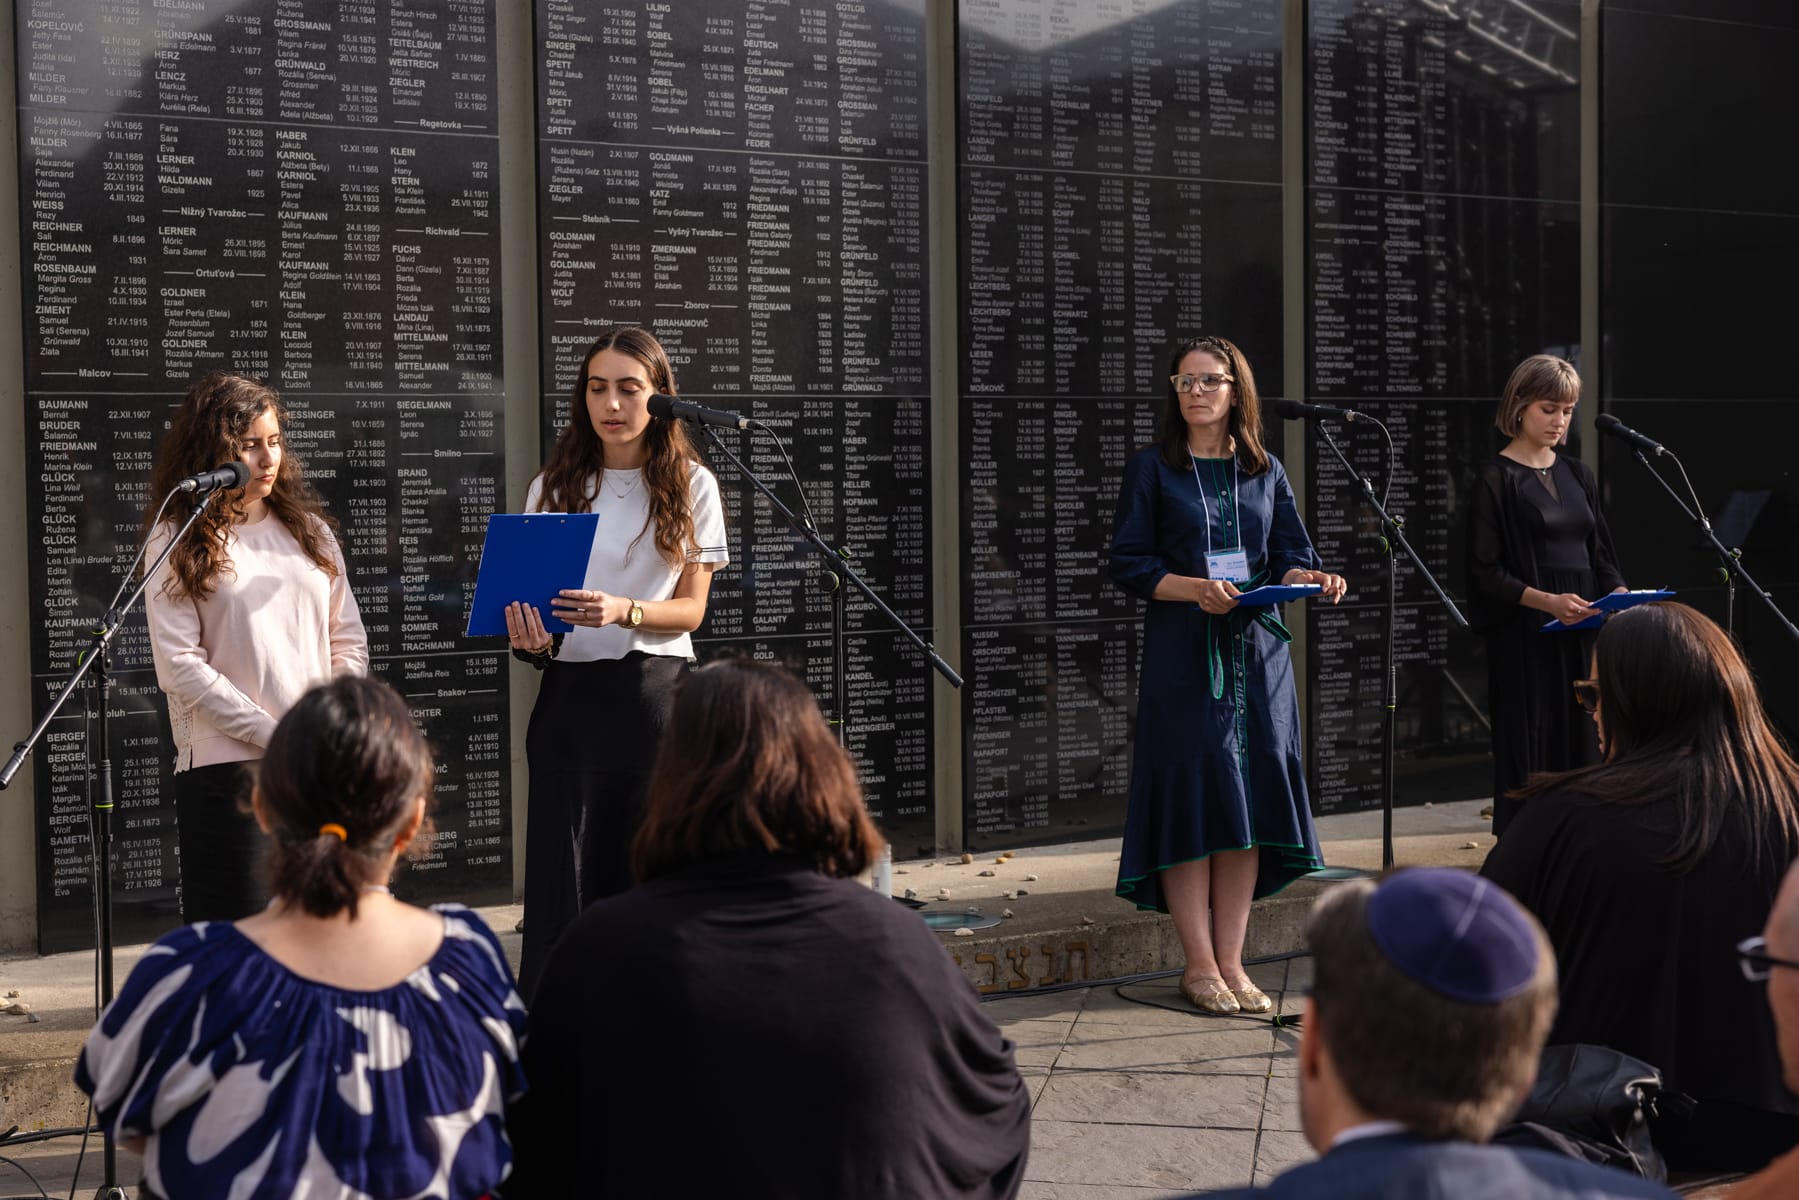 The poem “Resistance” By Haim Gouri and Monia Avrahmi was recited in Hebrew, English, and Slovak.